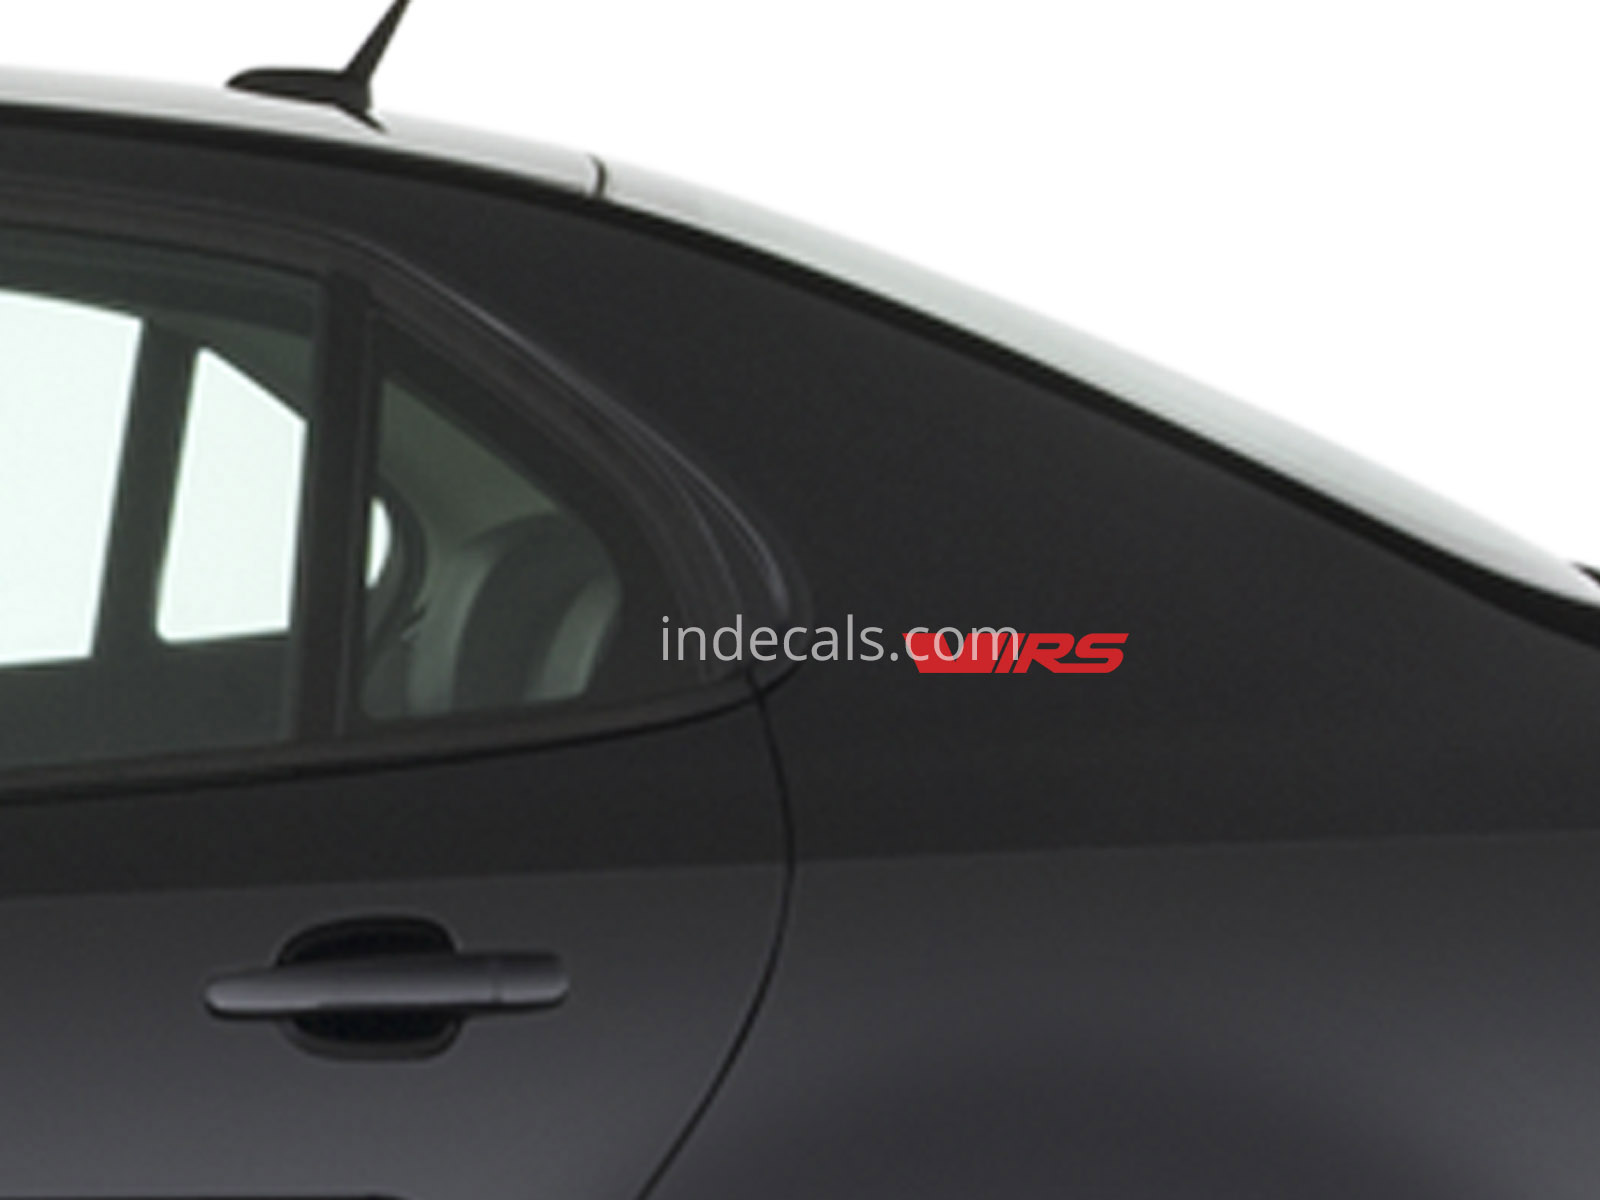 3 x Skoda RS Stickers for Rear Wing - Red